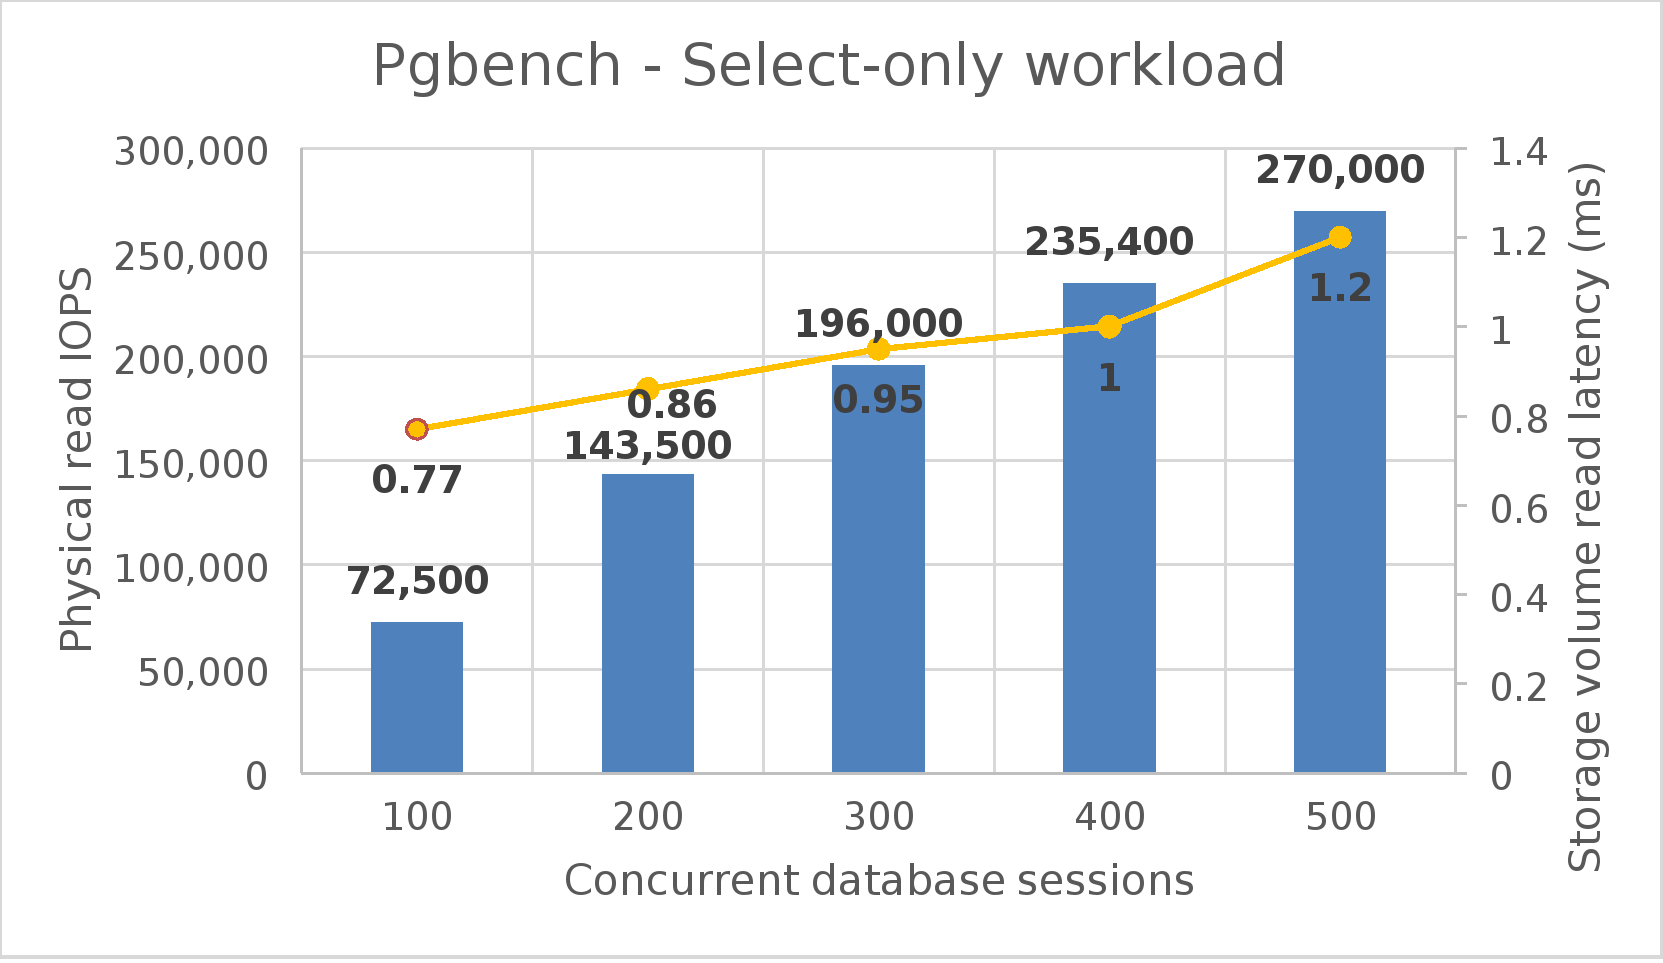 This figure shows the physical read IOPS increase with the number of concurrent database sessions for a select-only workload.